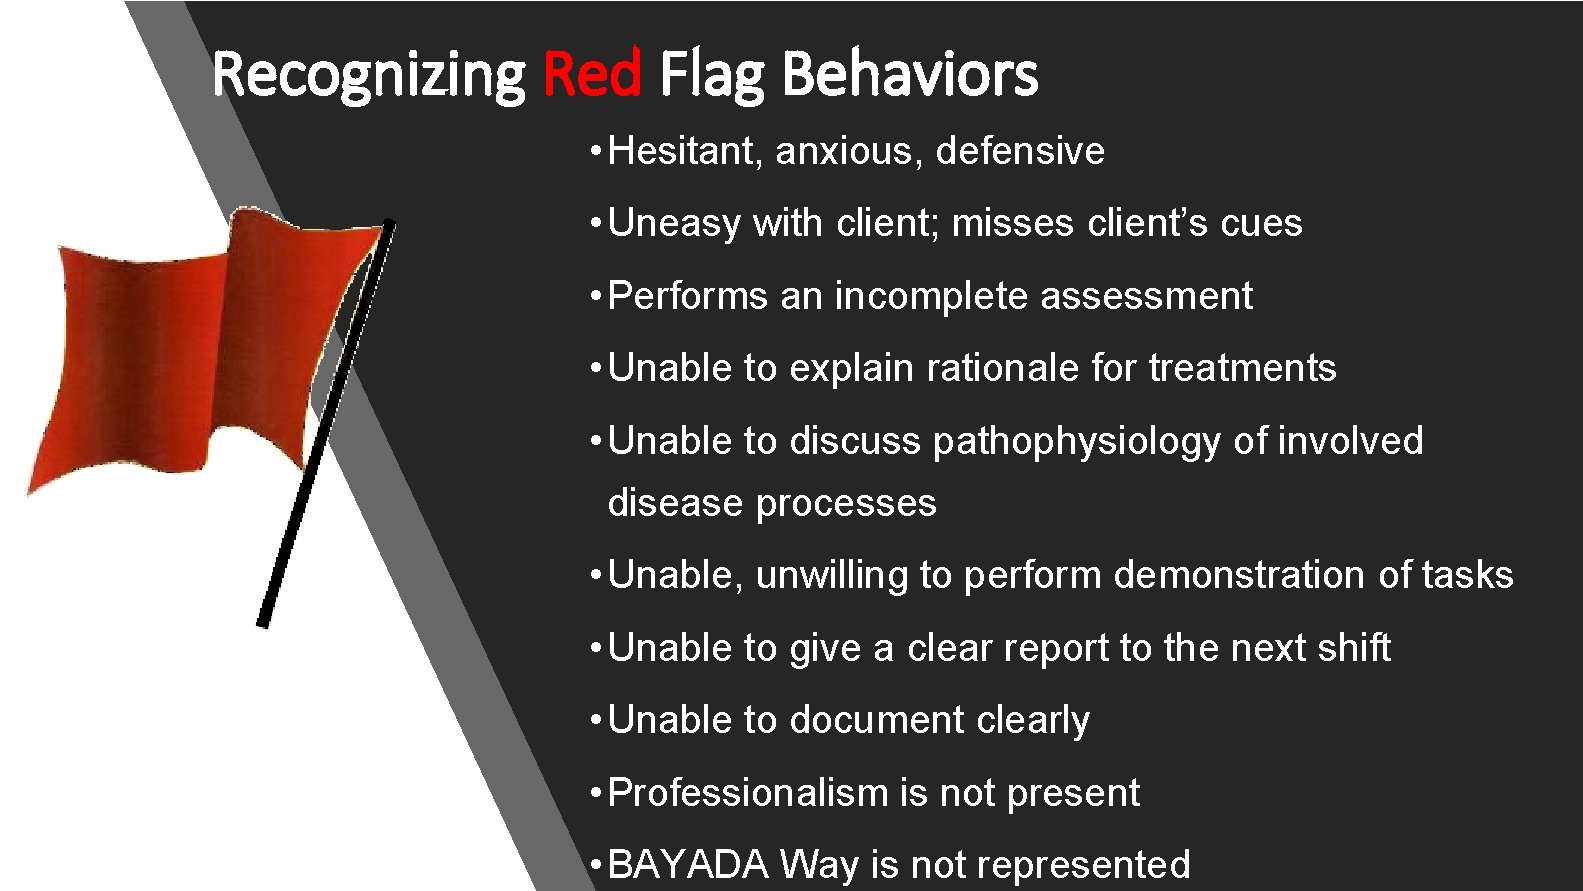 Recognizing Red Flag Behaviors • Hesitant, anxious, defensive • Uneasy with client; misses client’s